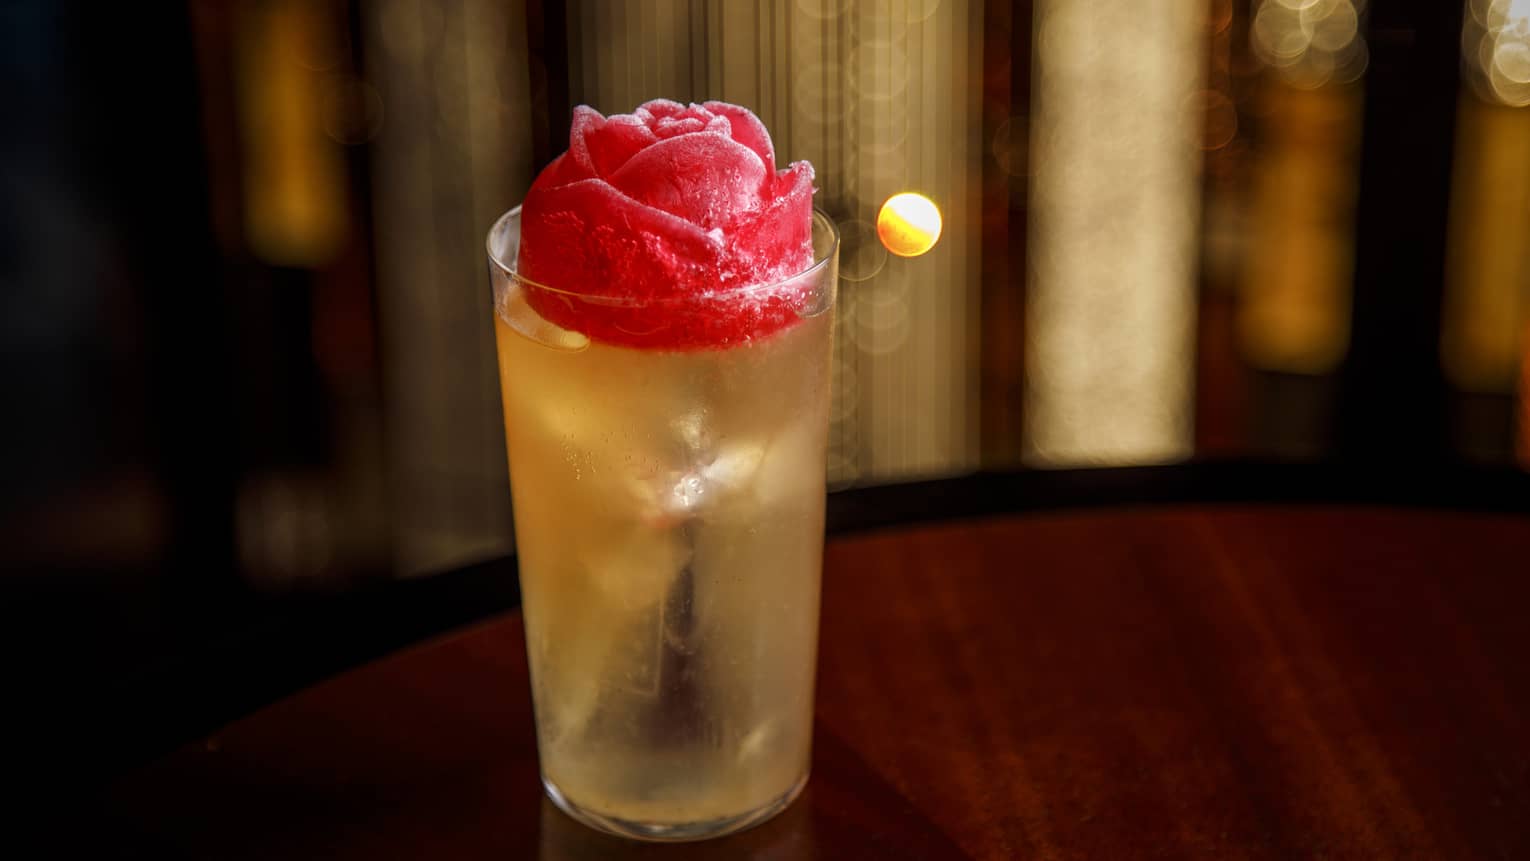 Yellow-hued cocktail in tall glass with rose-shaped ice cube